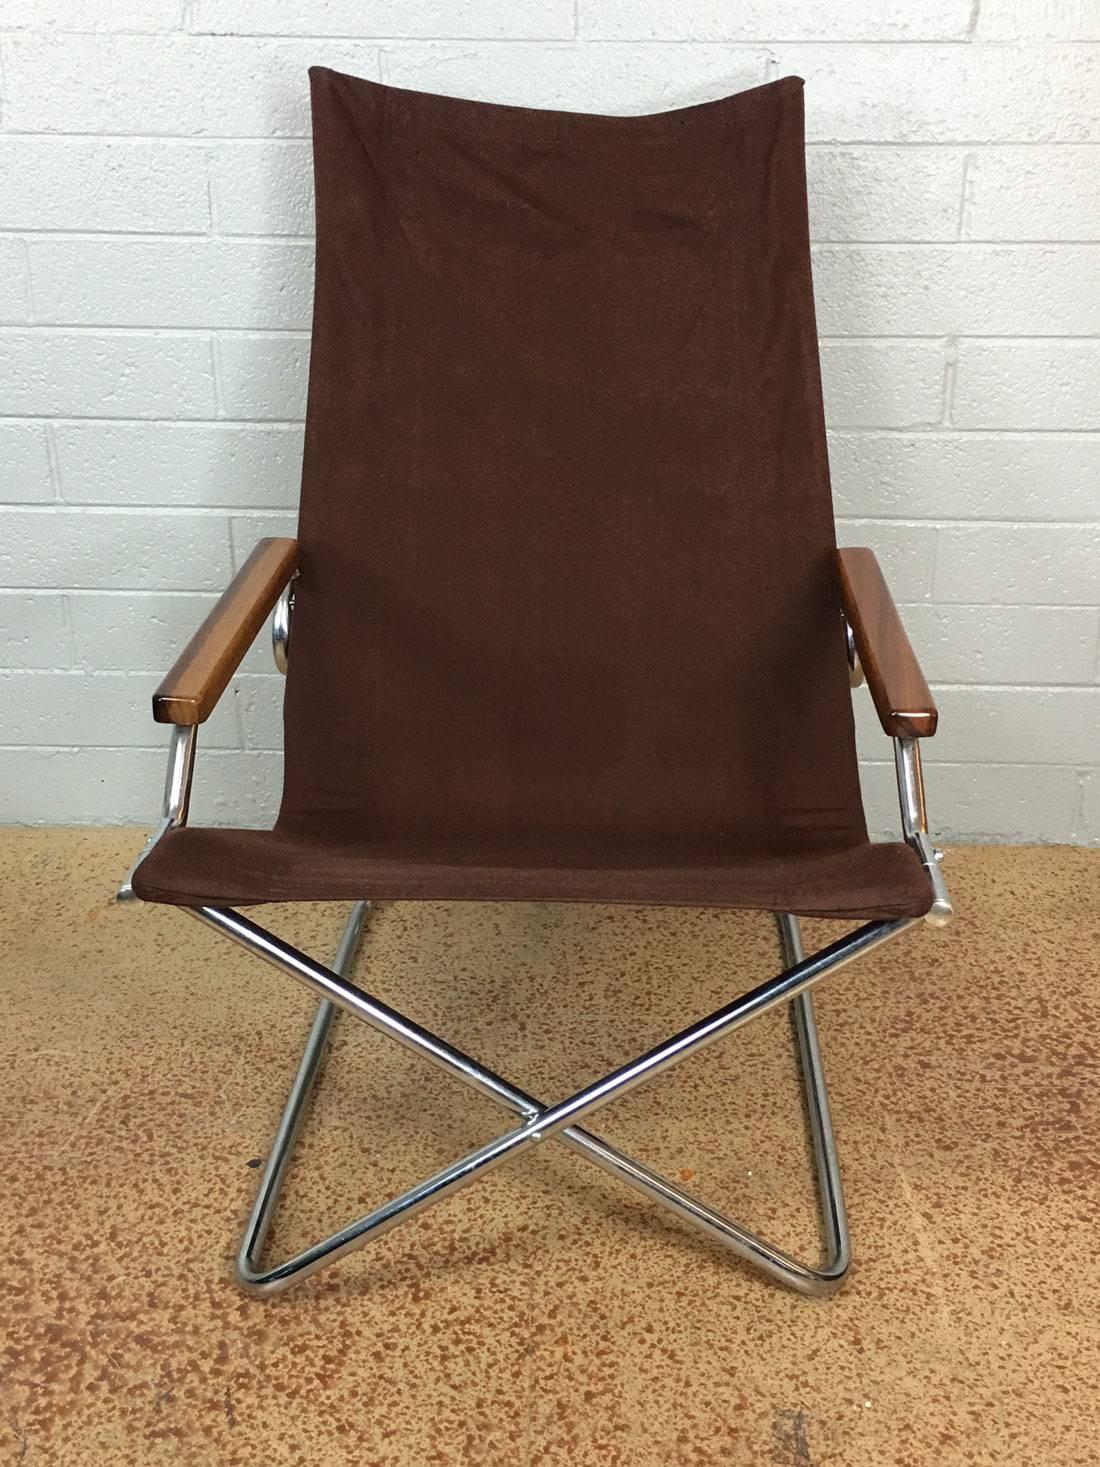 A Japanese folding sling chair by Suekichi Uchida. No rips, tears, or holes. Canvas sling in excellent condition, circa 1970s.